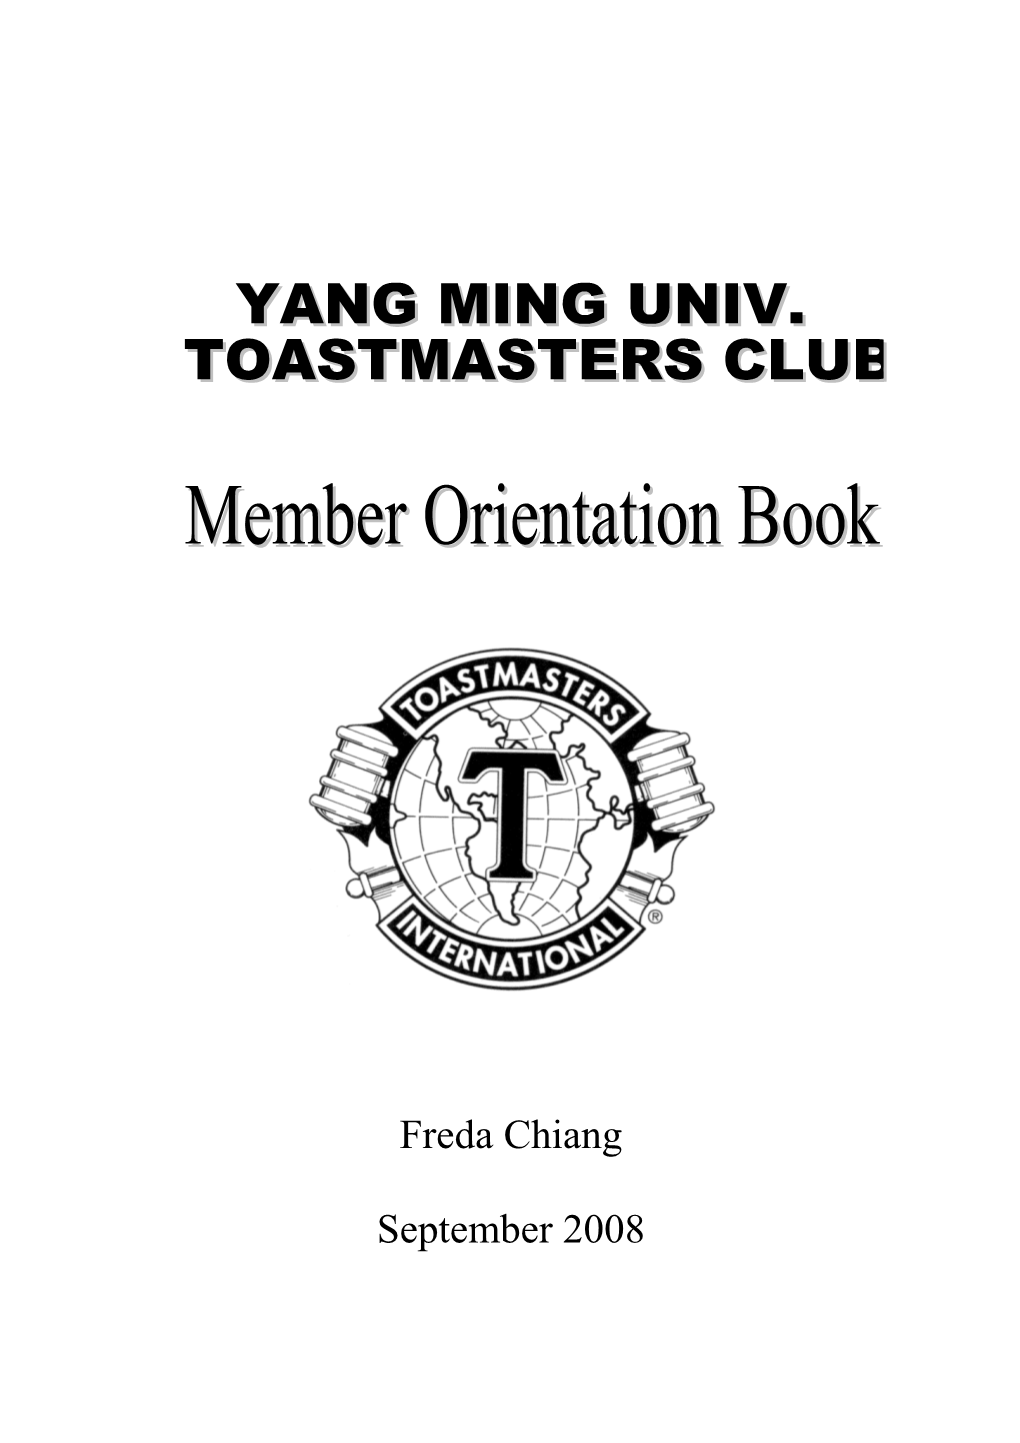 1 Useful Information for YM TMC Members